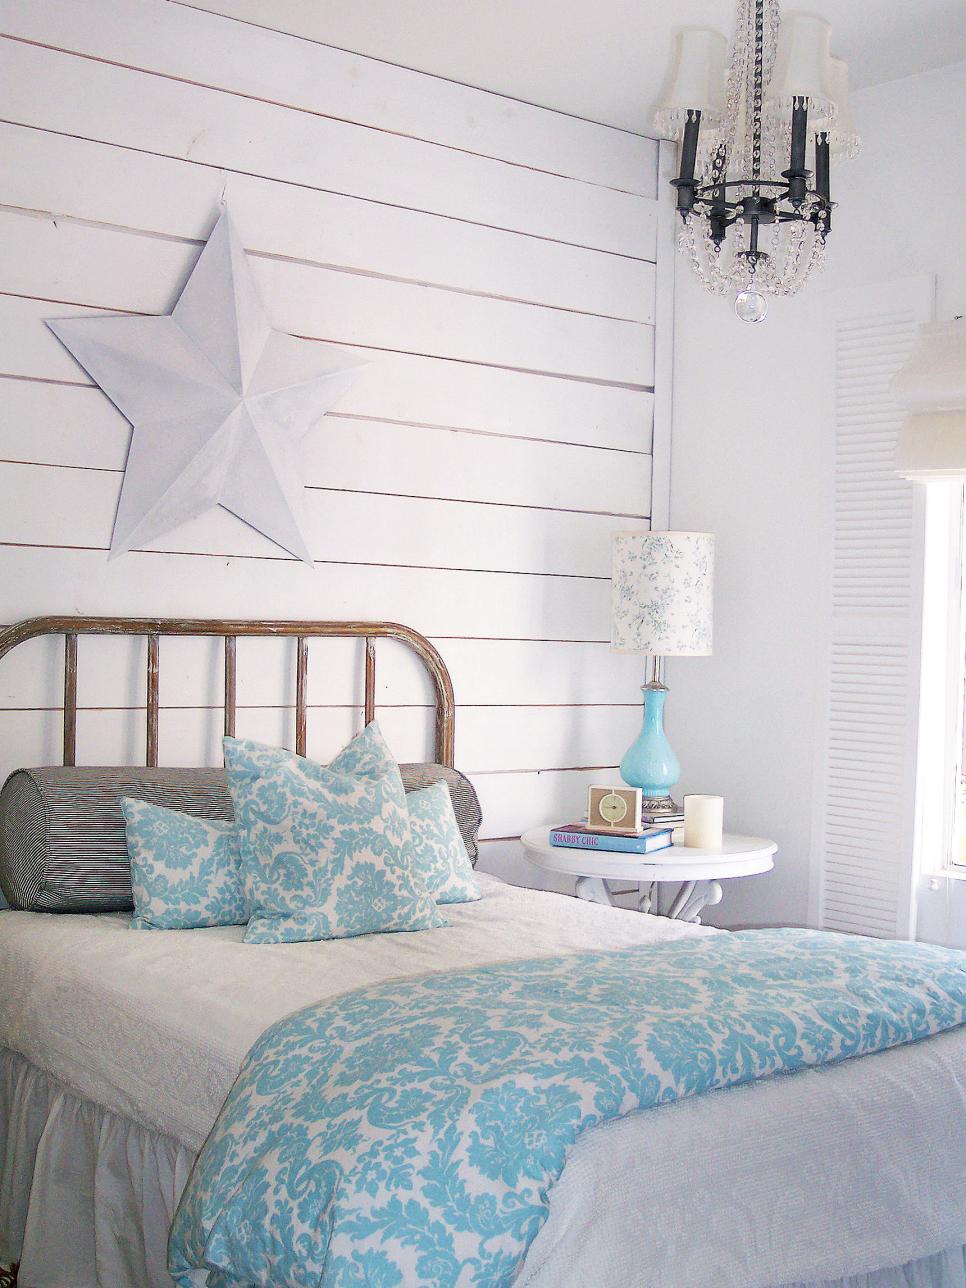 Add Shabby Chic Touches To Your Bedroom Design HGTV